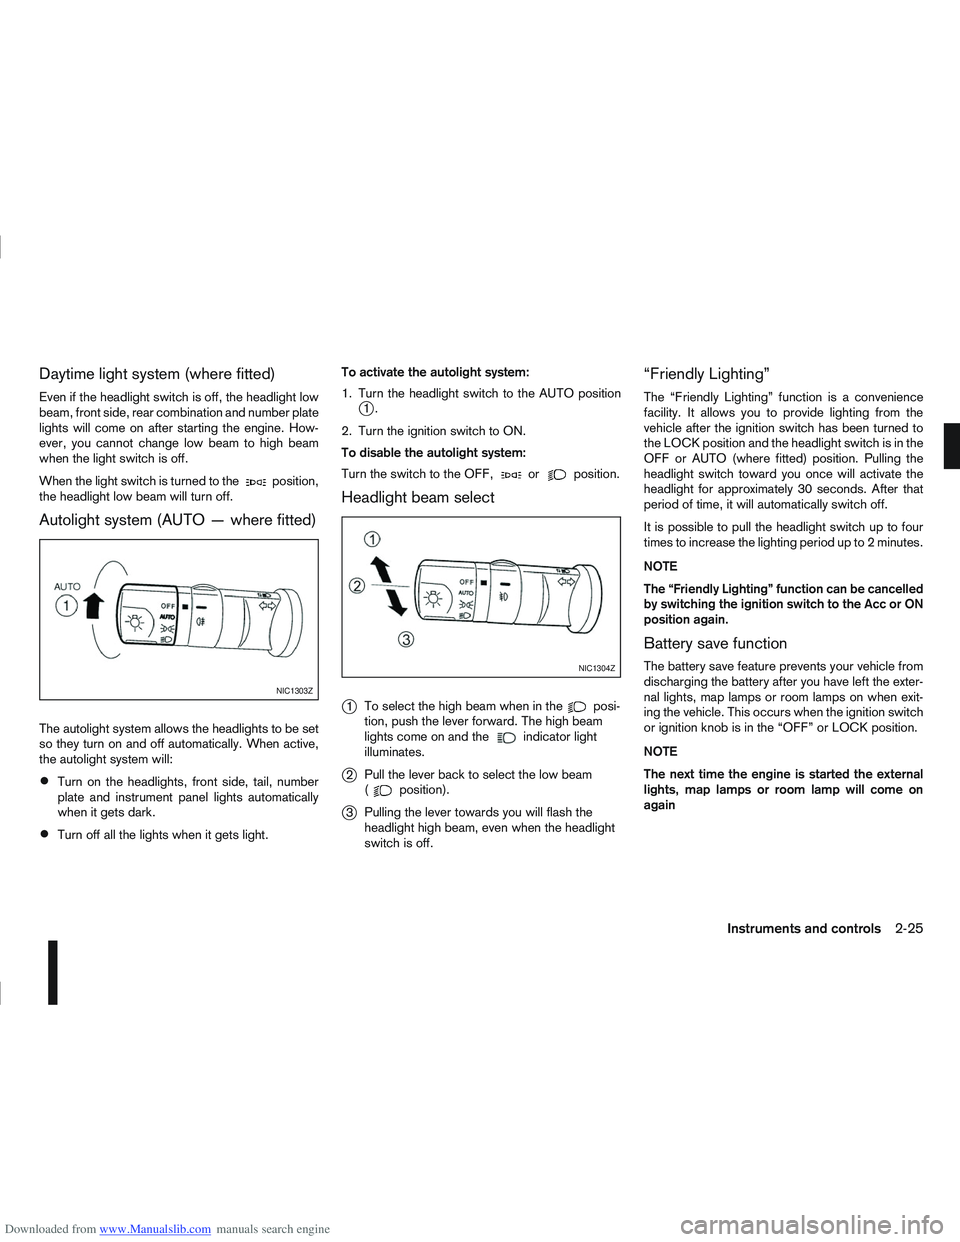 NISSAN QASHQAI 2006  Owners Manual Downloaded from www.Manualslib.com manuals search engine Daytime light system (where fitted)
Even if the headlight switch is off, the headlight low
beam, front side, rear combination and number plate
